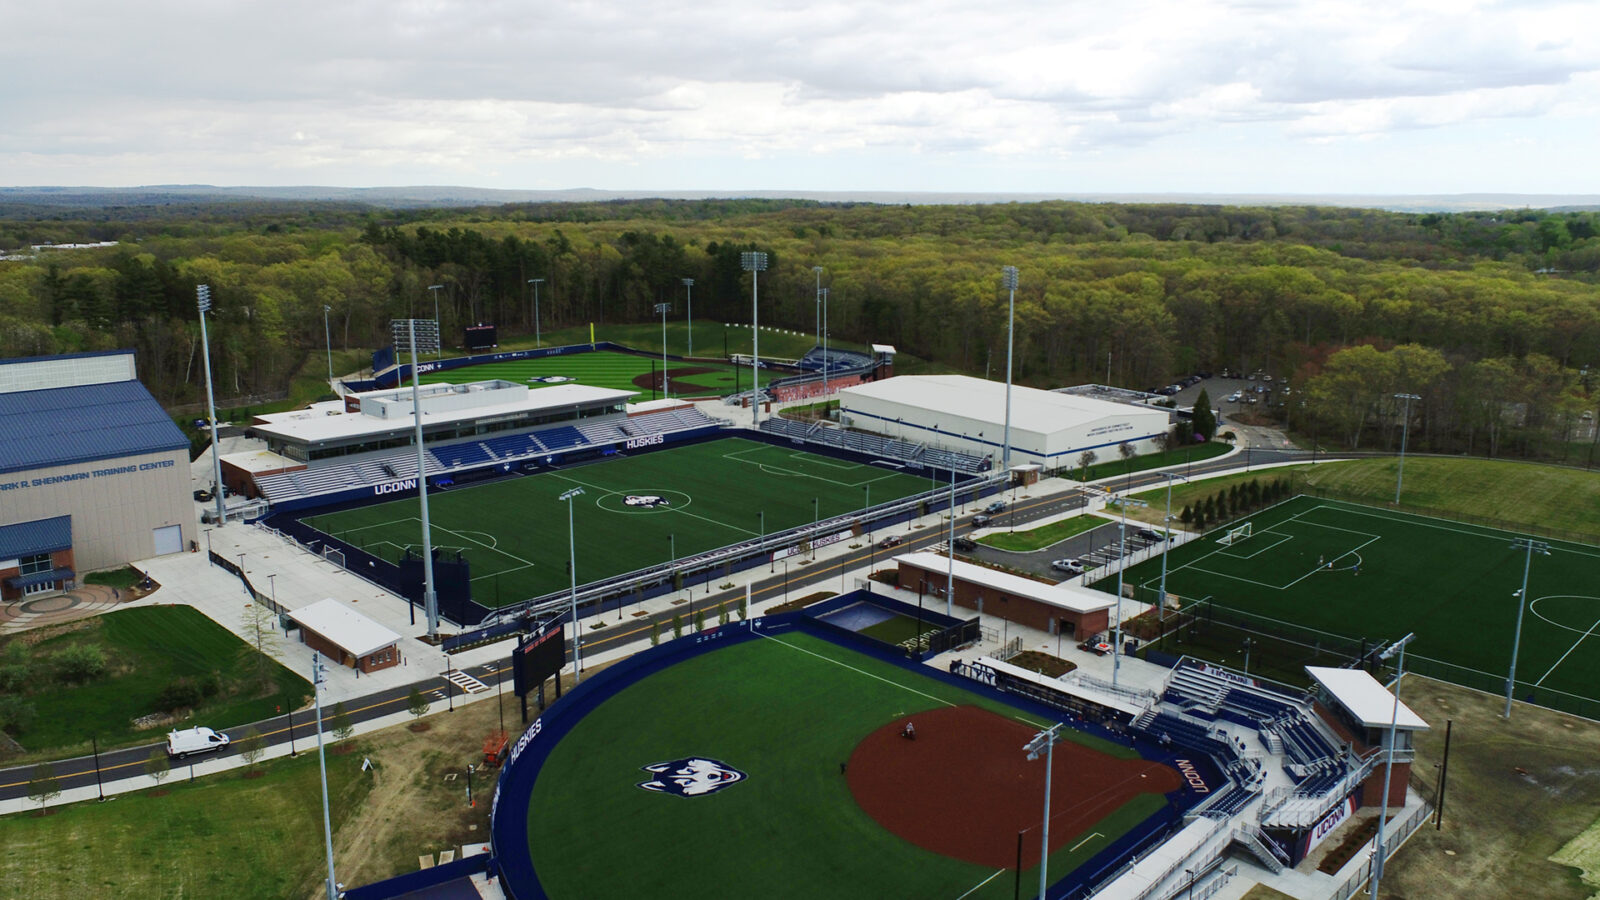 An aerial view of the Husky Athletic Village, including the baseball field.